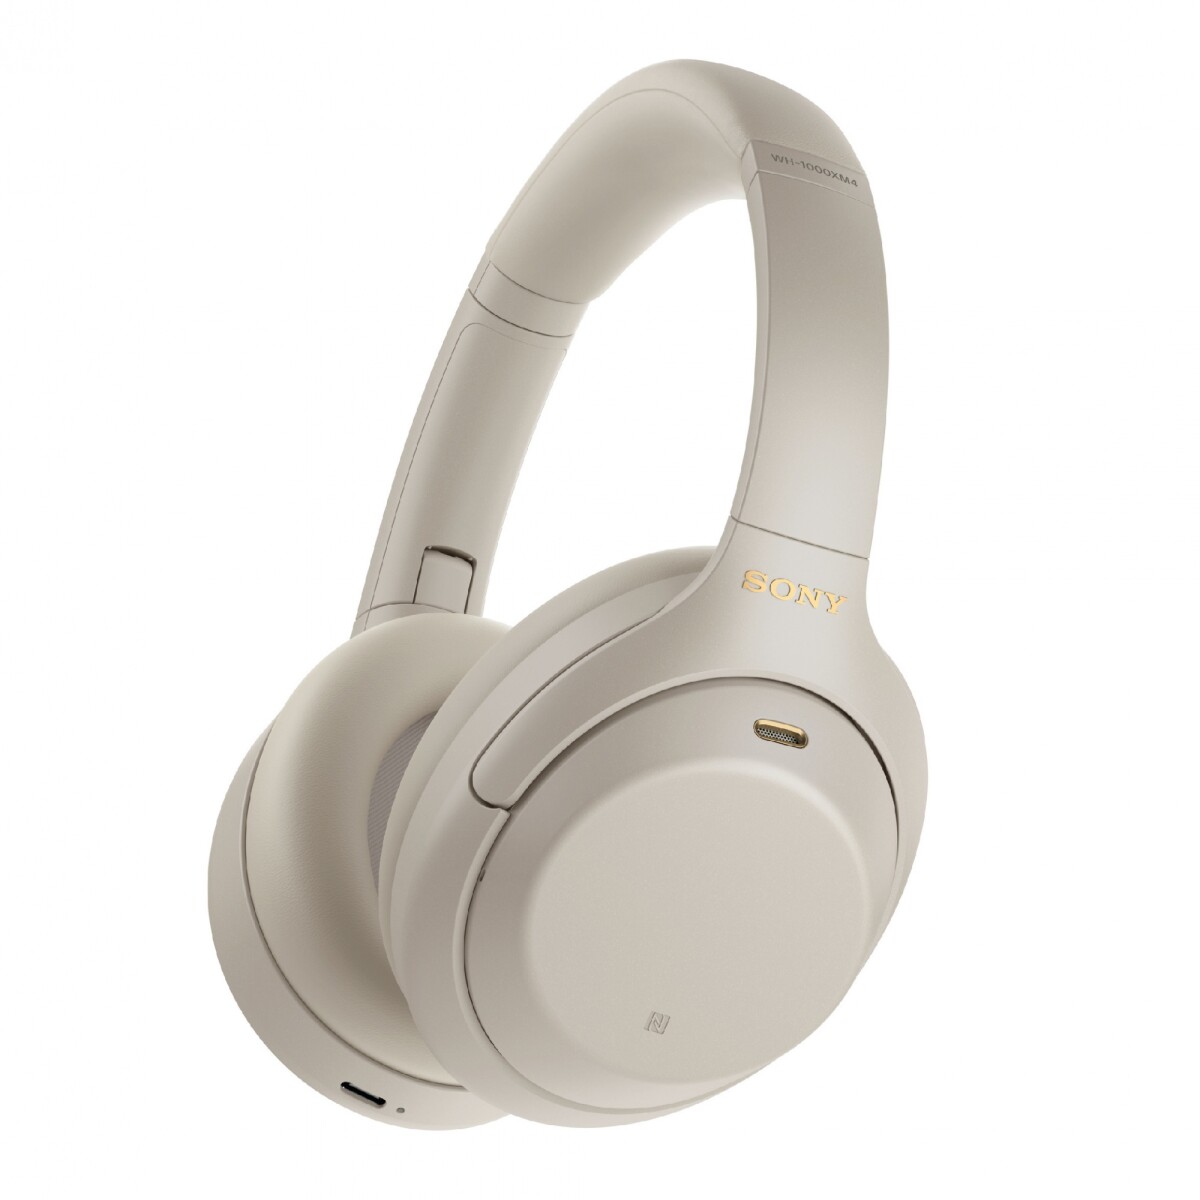 Auriculares inalámbricos Sony con Noise Cancelling WH-1000XM4 